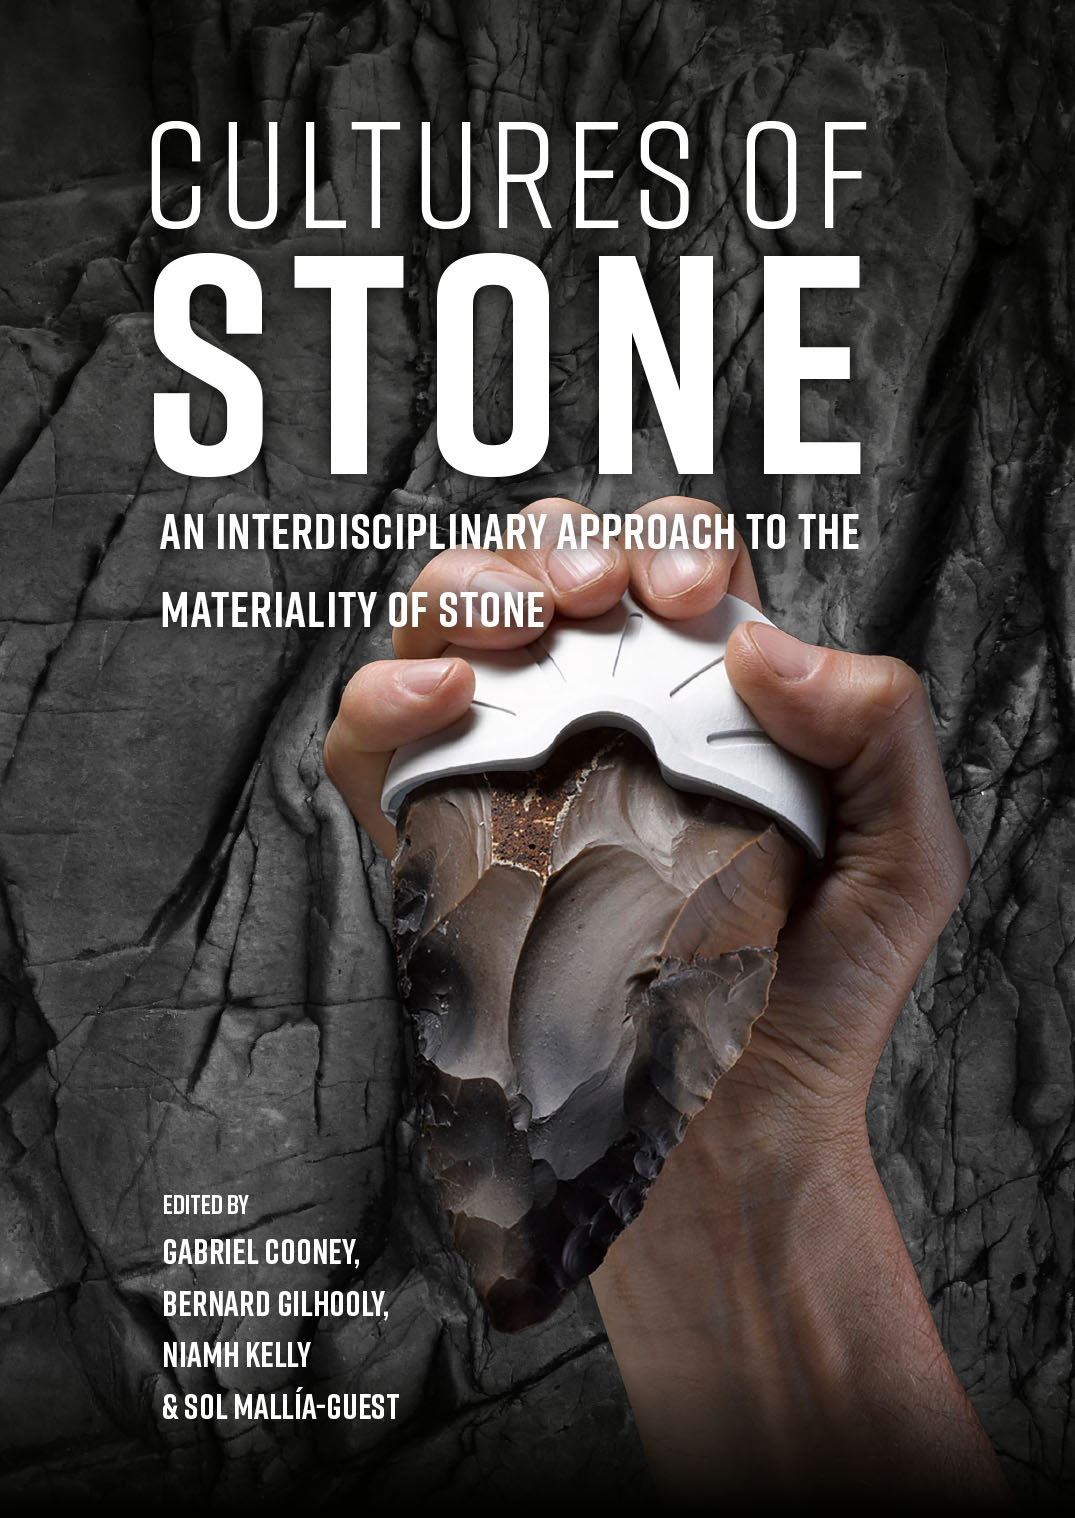 Cultures of Stone. An Interdisciplinary Approach to the Materiality of Stone, 2020, 298 p.